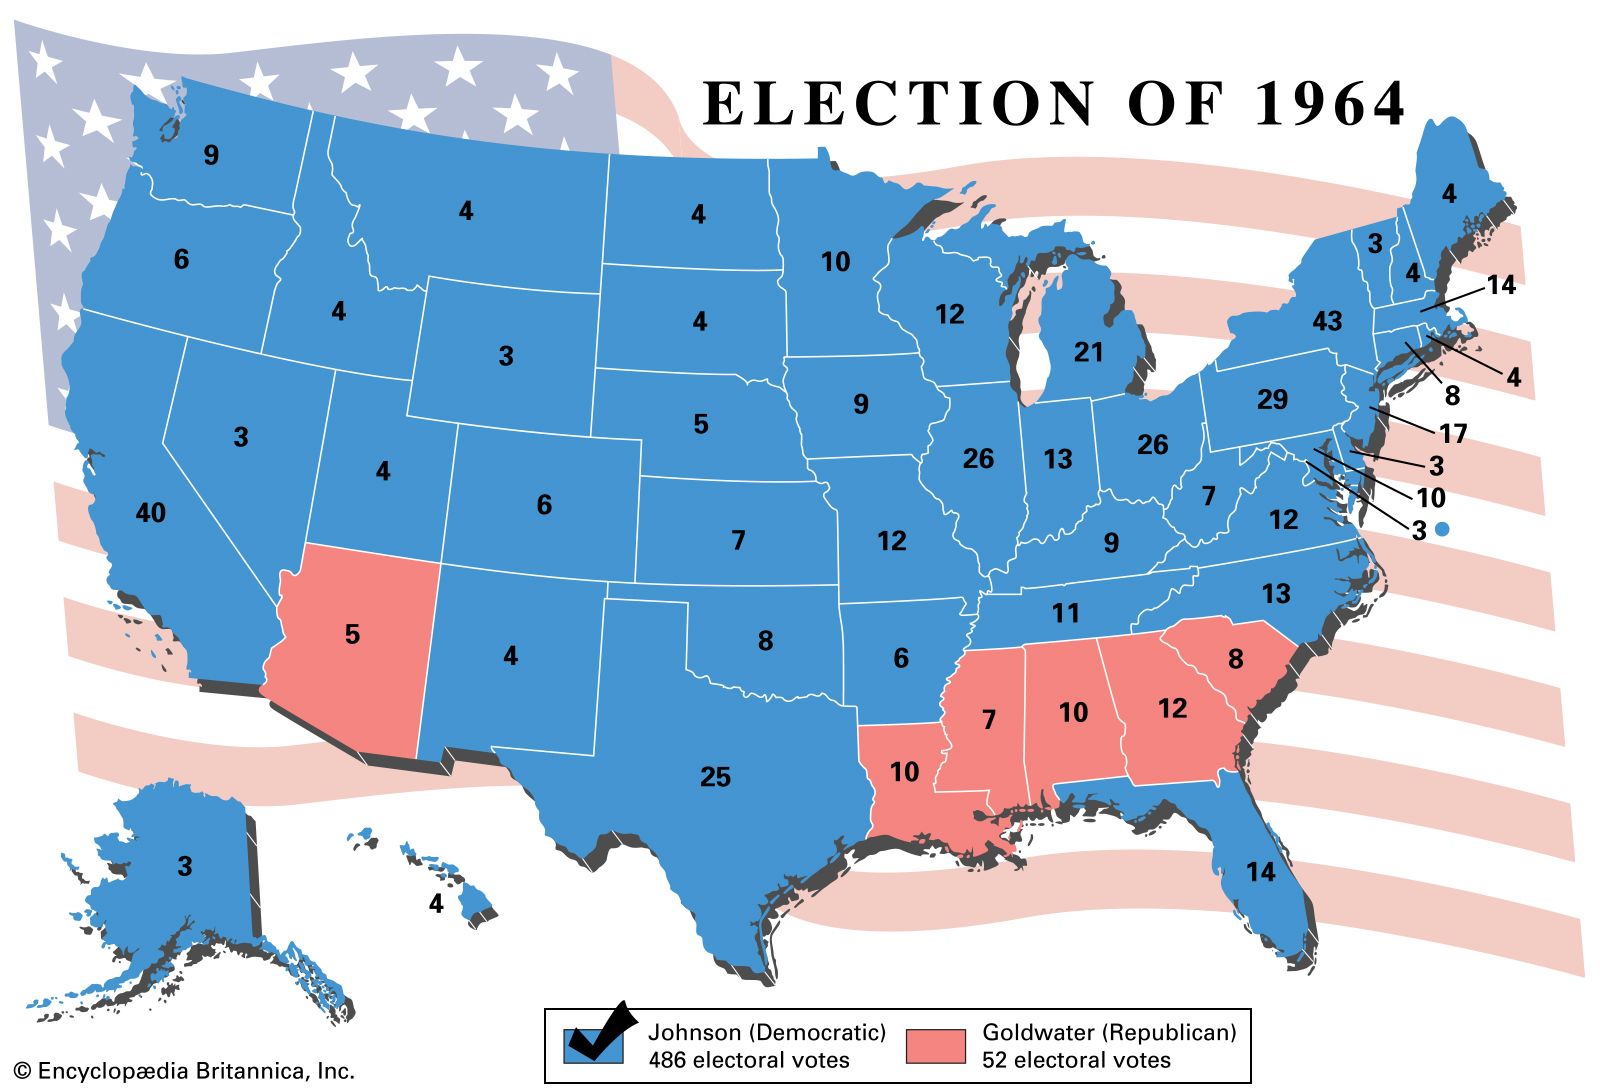 election-Results-Candidate-American-Votes-Sources-Lyndon-1964.jpg